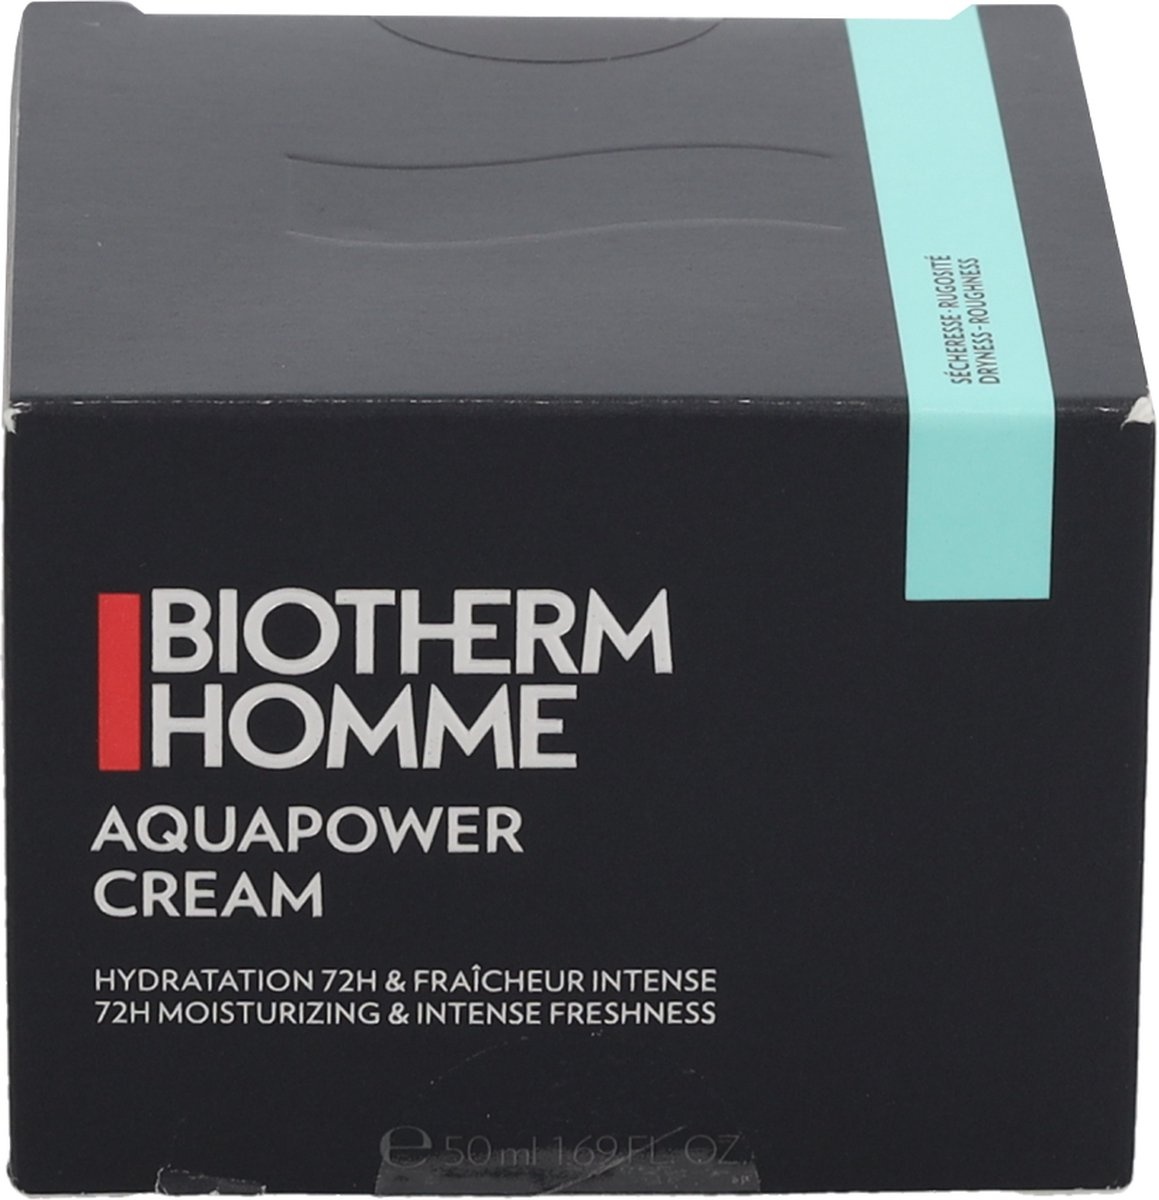 Biotherm Homme Homme Aquapower 72H Hydration – 50 ml – Tagescreme – Verpackung beschädigt